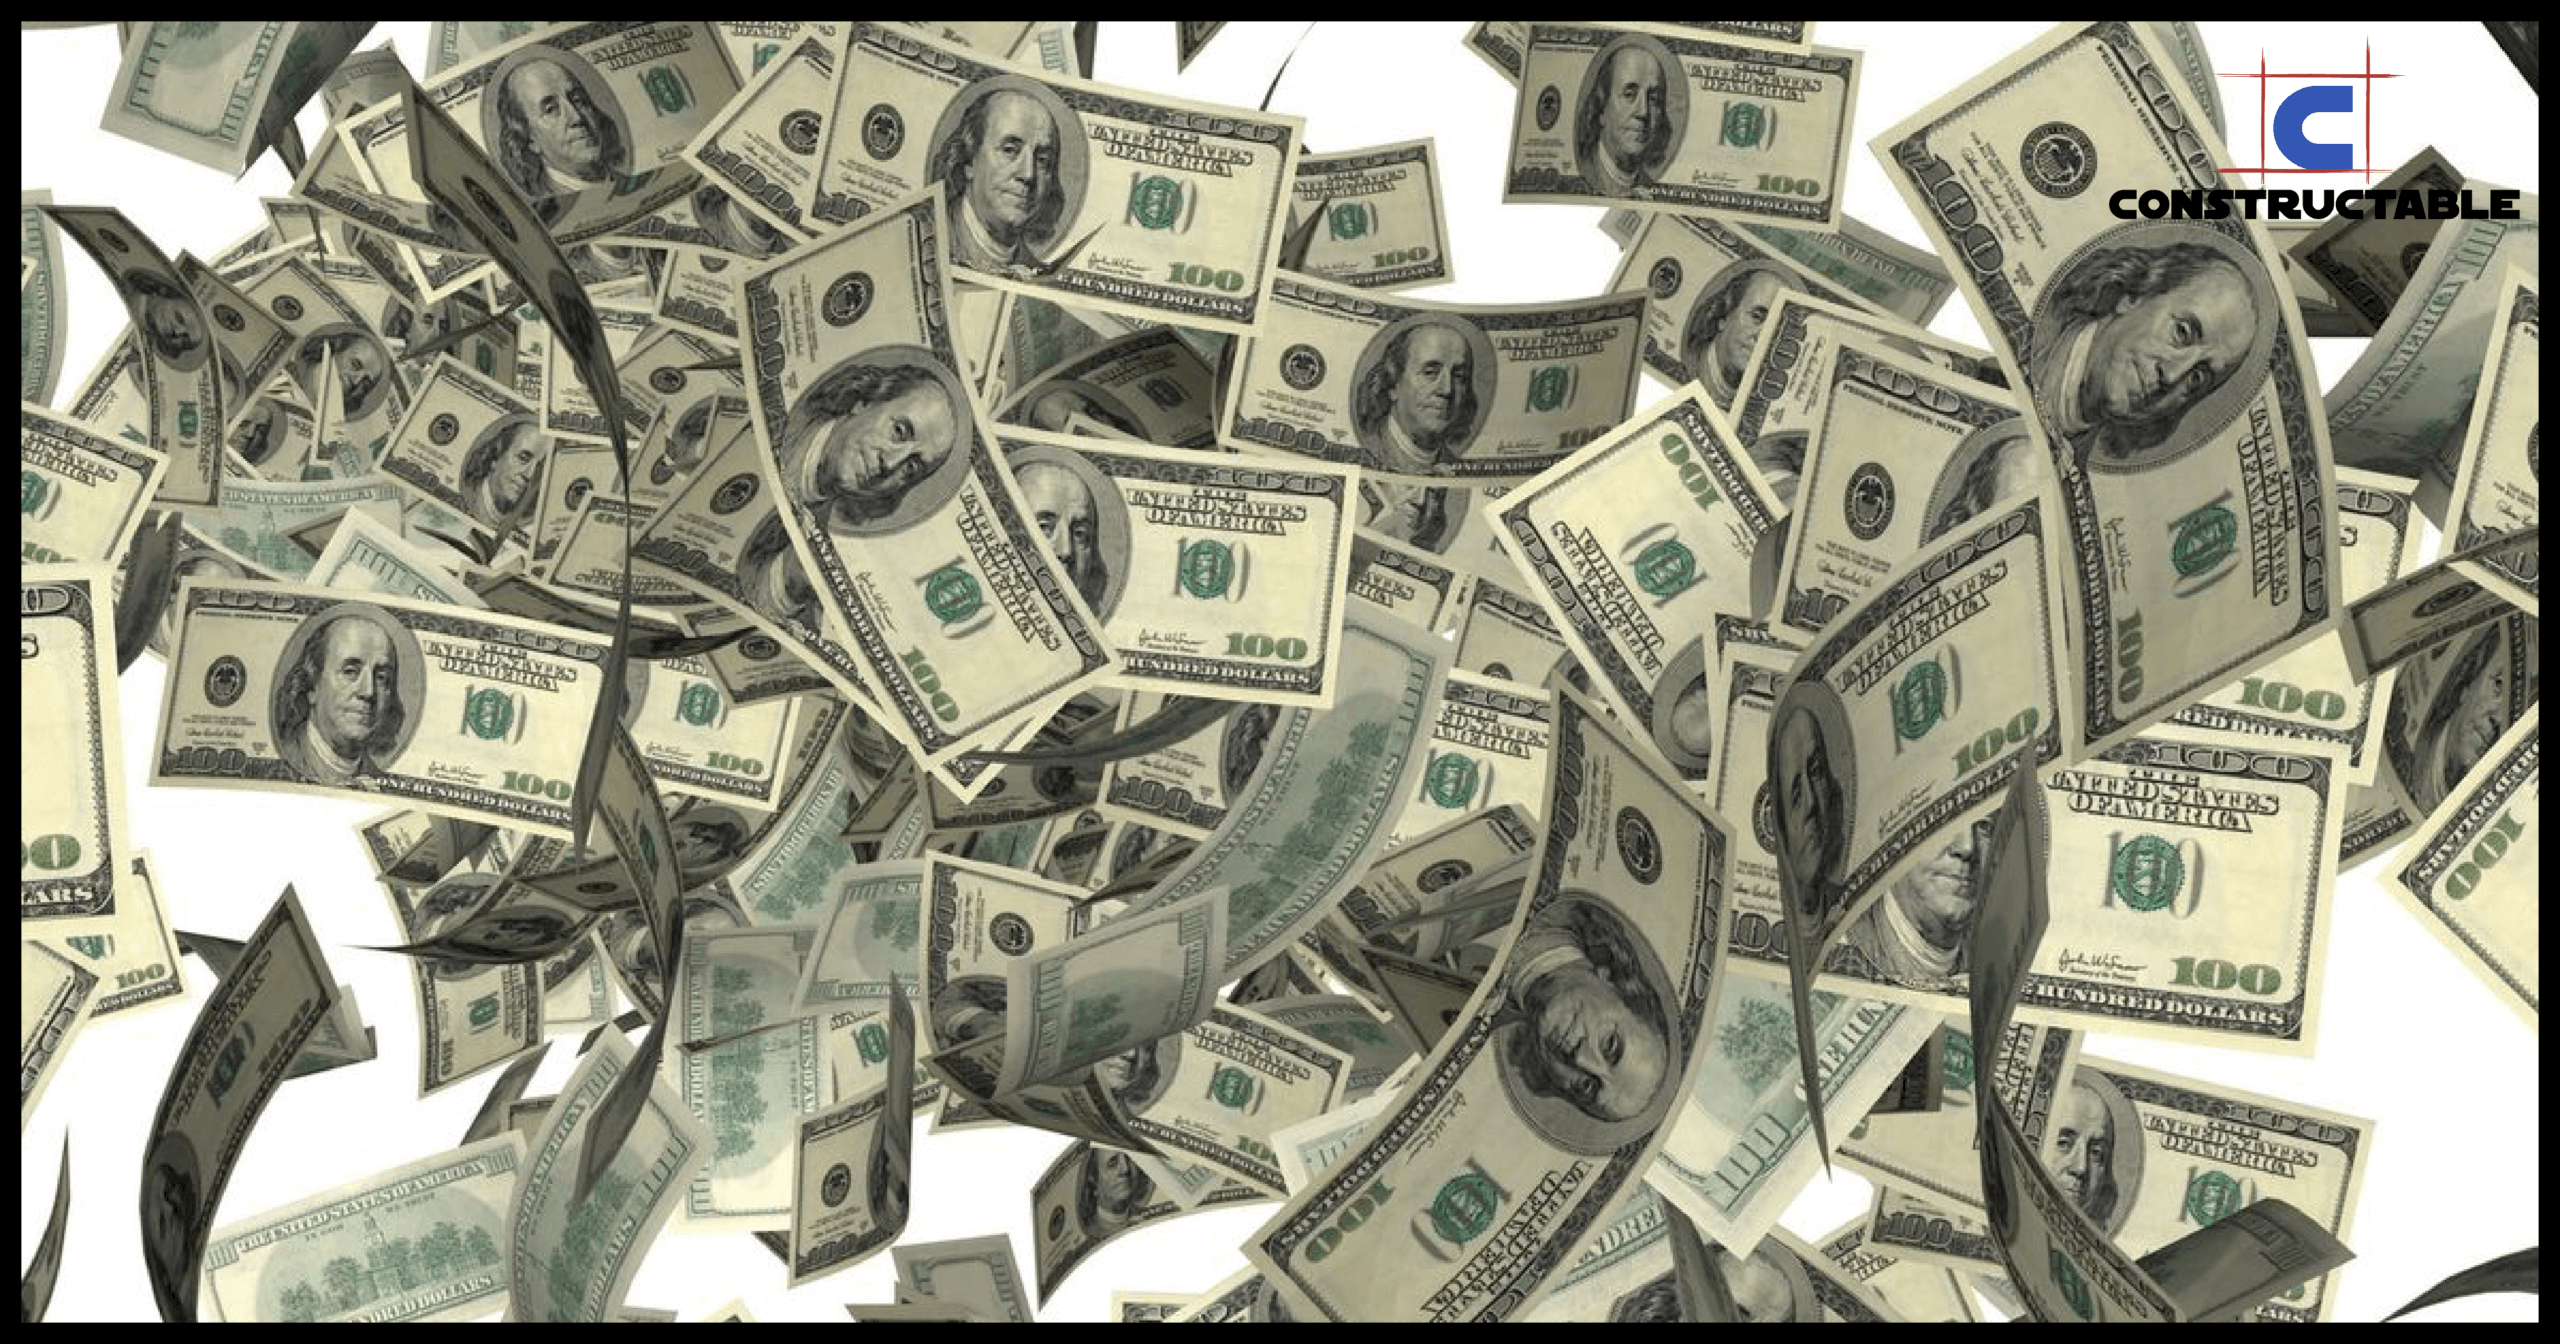 A chaotic scatter of numerous $100 dollar bills floating against a light background, symbolizing soaring construction costs, with a logo labeled "constructable" located at the bottom right corner.